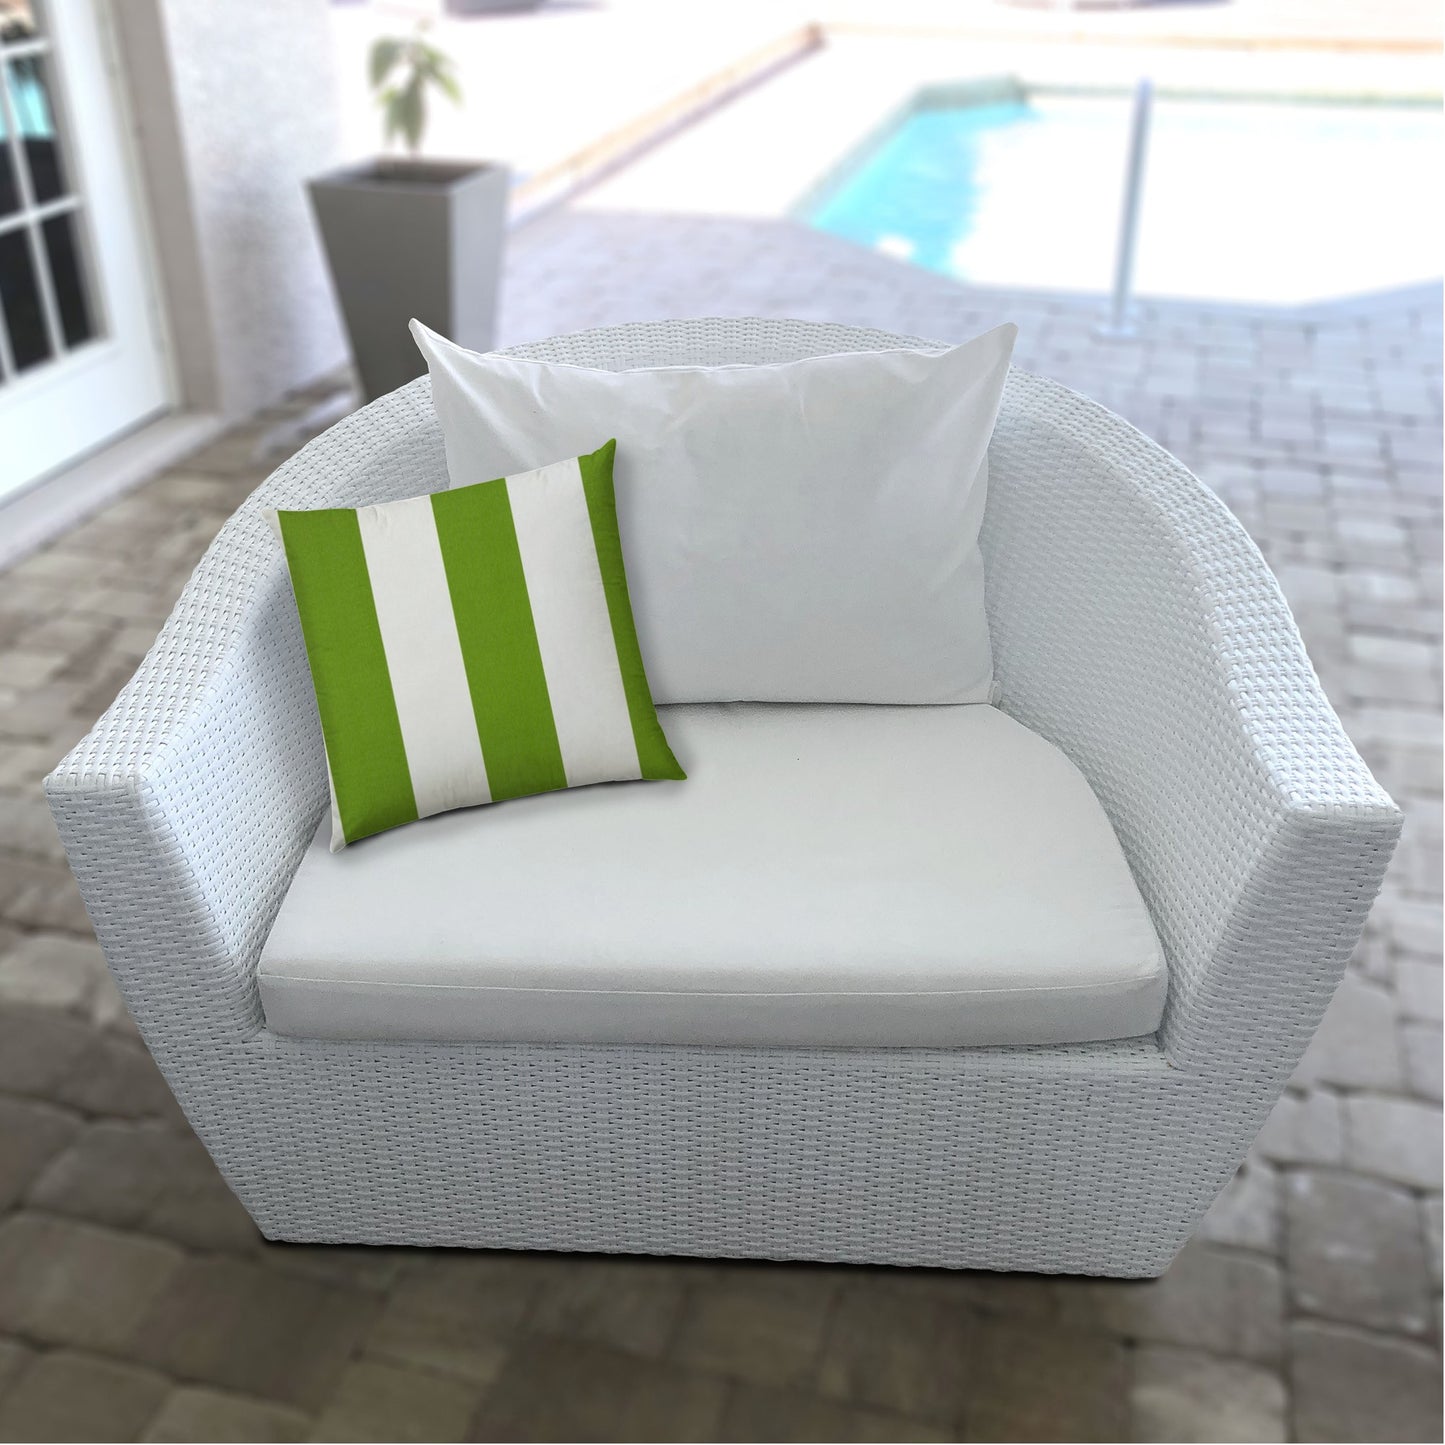 14" X 20" Green And Ivory Blown Seam Striped Lumbar Indoor Outdoor Pillow